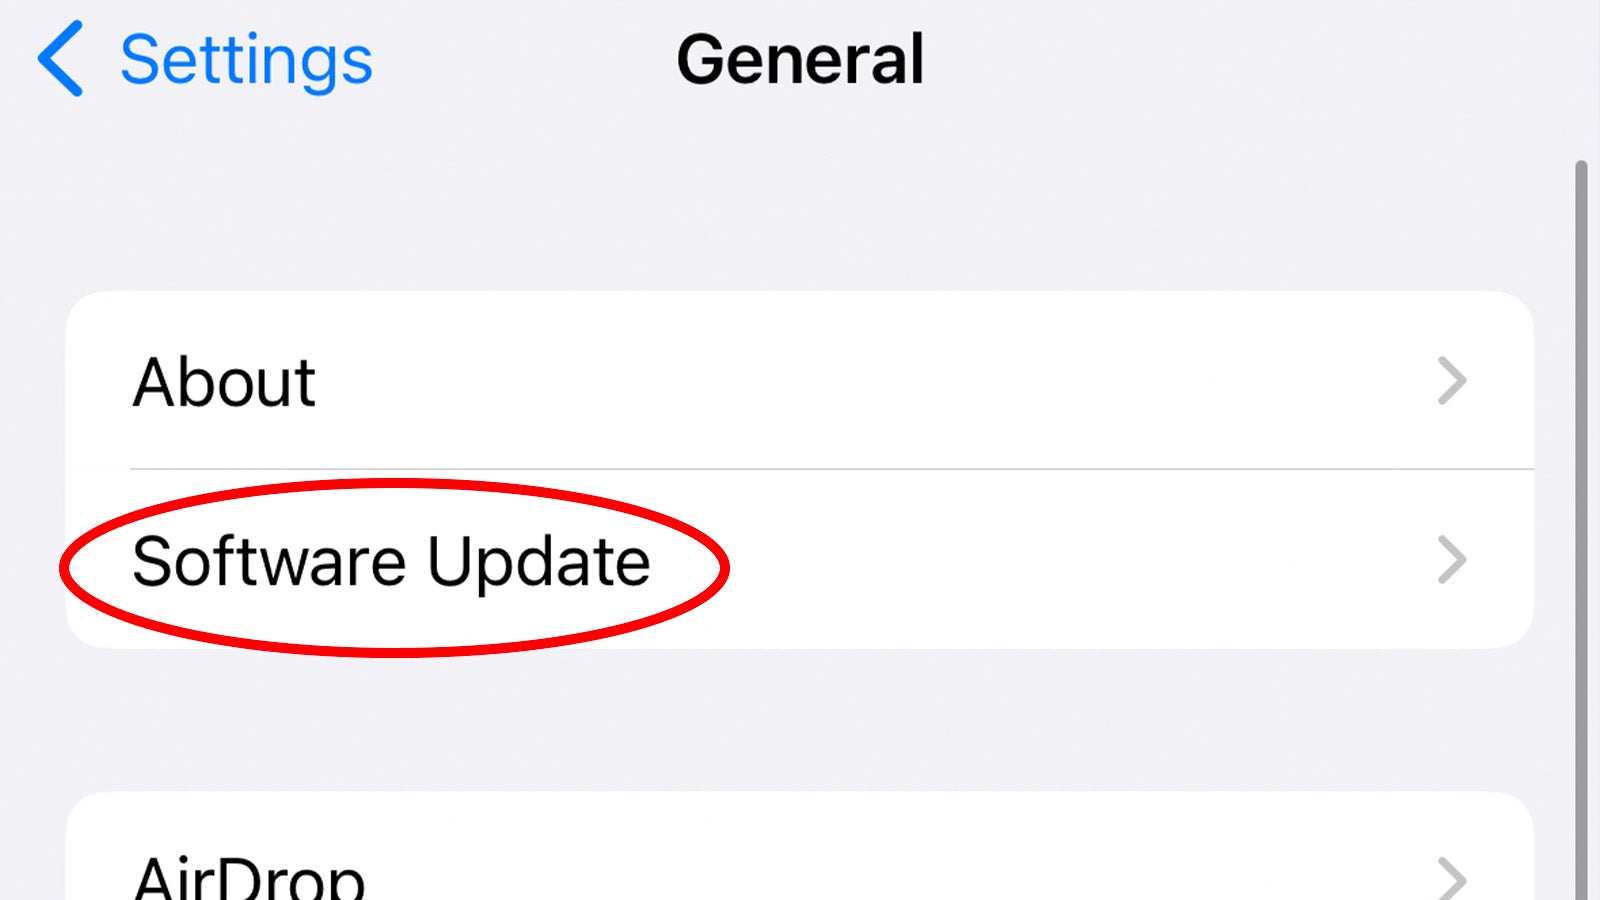 Software update tab in the Settings app